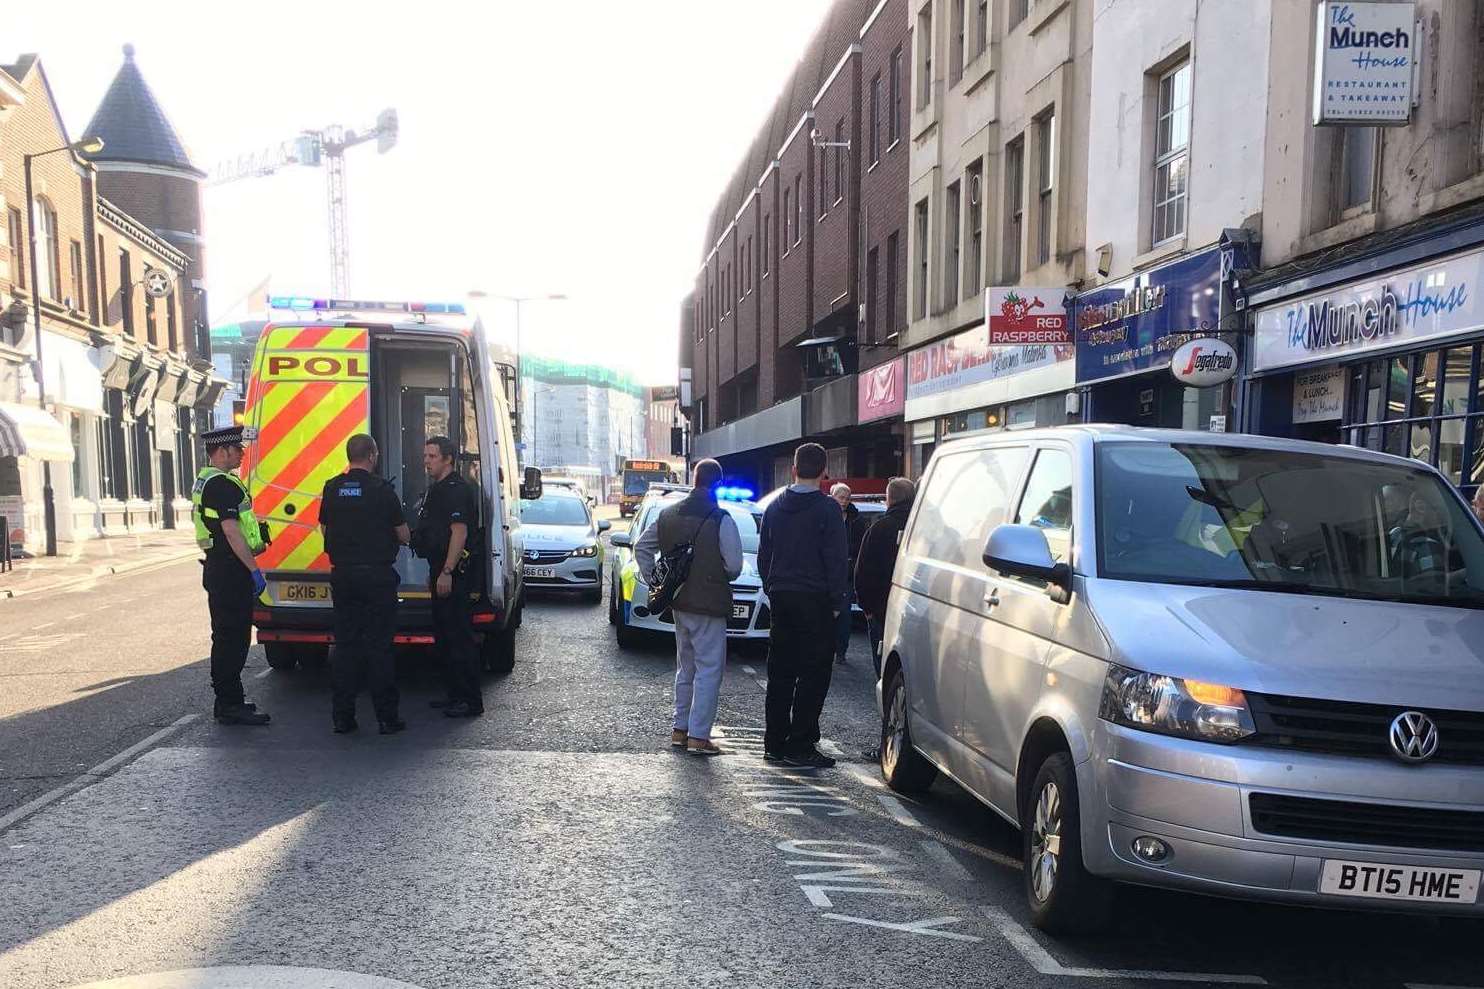 The incident happened outside The Munch House. Picture: Jessica Finn